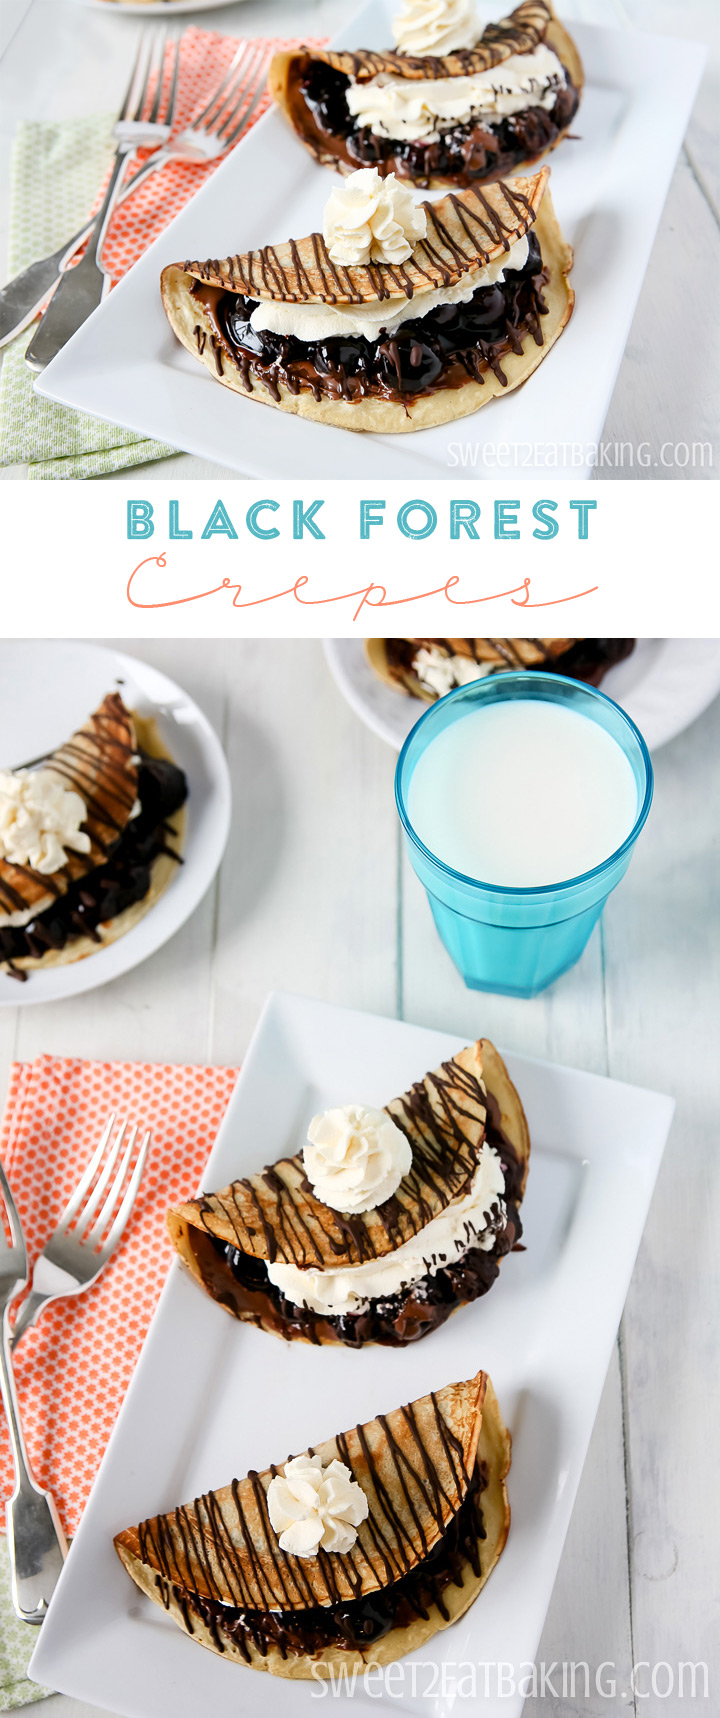 Black Forest Crepes with Nutella Recipe by Sweet2EatBaking.com